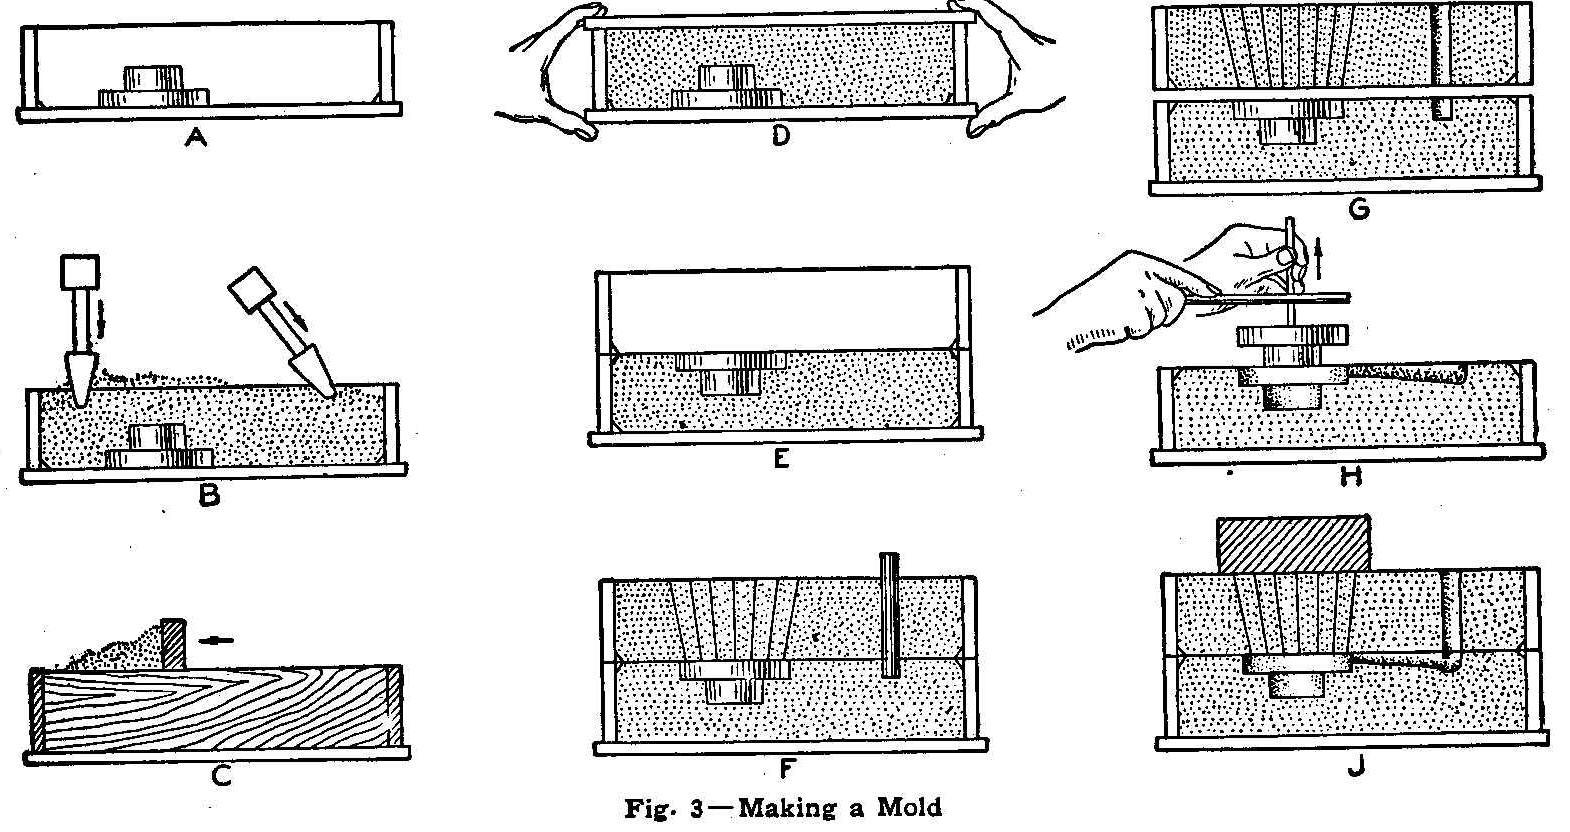 Fig,. 3-Making a Mold